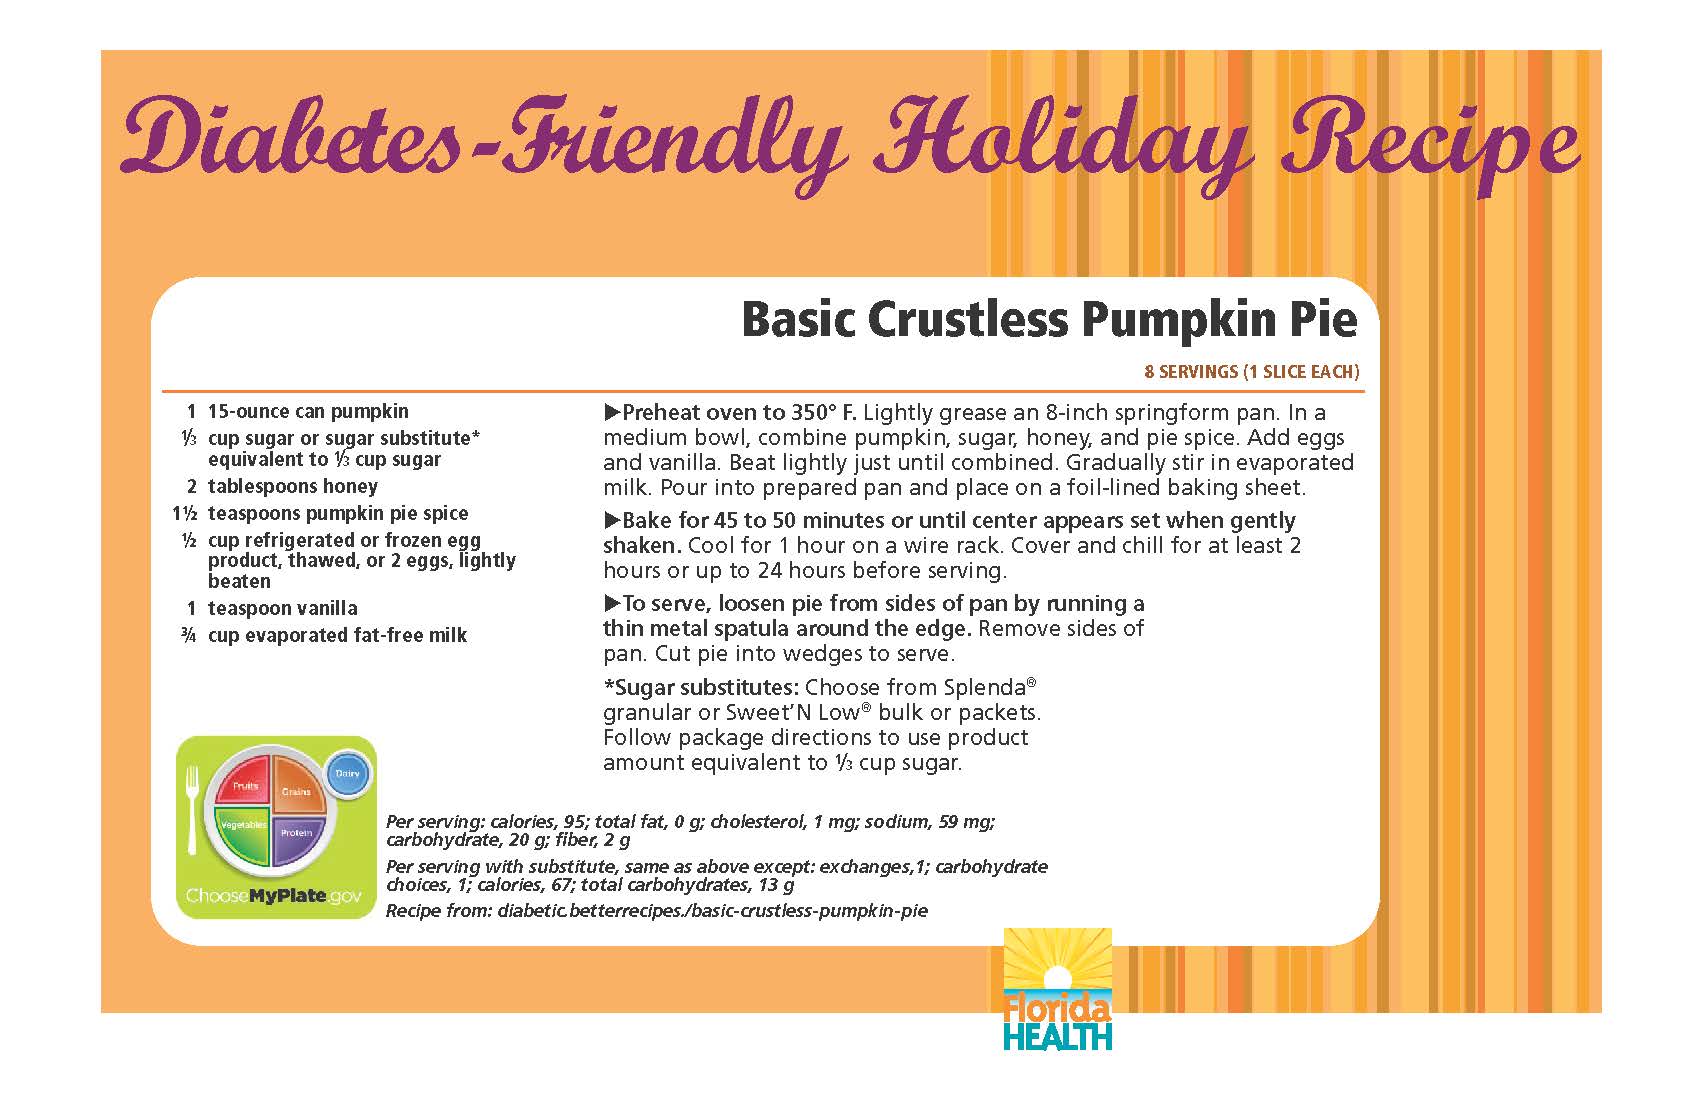 Diabetes-Friendly Holiday Recipe Basic Crustless Pumpkin Pie 8 servings (1 slice each) 1 15-ounce can pumpkin 1⁄3 cup sugar or sugar substitute* equivalent to 1⁄3 cup sugar 2 tablespoons honey 1½ teaspoons pumpkin pie spice ½ cup refrigerated or frozen egg product, thawed, or 2 eggs, lightly beaten 1 teaspoon vanilla ¾ cup evaporated fat-free milk Basic Crustless Pumpkin Pie 8 servings (1 slice each) Preheat oven to 350° F. Lightly grease an 8-inch springform pan. In a medium bowl, combine pumpkin, sugar, honey, and pie spice. Add eggs and vanilla. Beat lightly just until combined. Gradually stir in evaporated milk. Pour into prepared pan and place on a foil-lined baking sheet. Bake for 45 to 50 minutes or until center appears set when gently shaken. Cool for 1 hour on a wire rack. Cover and chill for at least 2 hours or up to 24 hours before serving. To serve, loosen pie from sides of pan by running a thin metal spatula around the edge. Remove sides of pan. Cut pie into wedges to serve. *Sugar substitutes: Choose from Splenda® granular or Sweet’N Low® bulk or packets. Follow package directions to use product amount equivalent to 1⁄3 cup sugar. Per serving: calories, 95; total fat, 0 g; cholesterol, 1 mg; sodium, 59 mg; carbohydrate, 20 g; fiber, 2 g Per serving with substitute, same as above except: exchanges,1; carbohydrate choices, 1; calories, 67; total carbohydrates, 13 g Recipe from: diabetic.betterrecipes./basic-crustless-pumpkin-pie